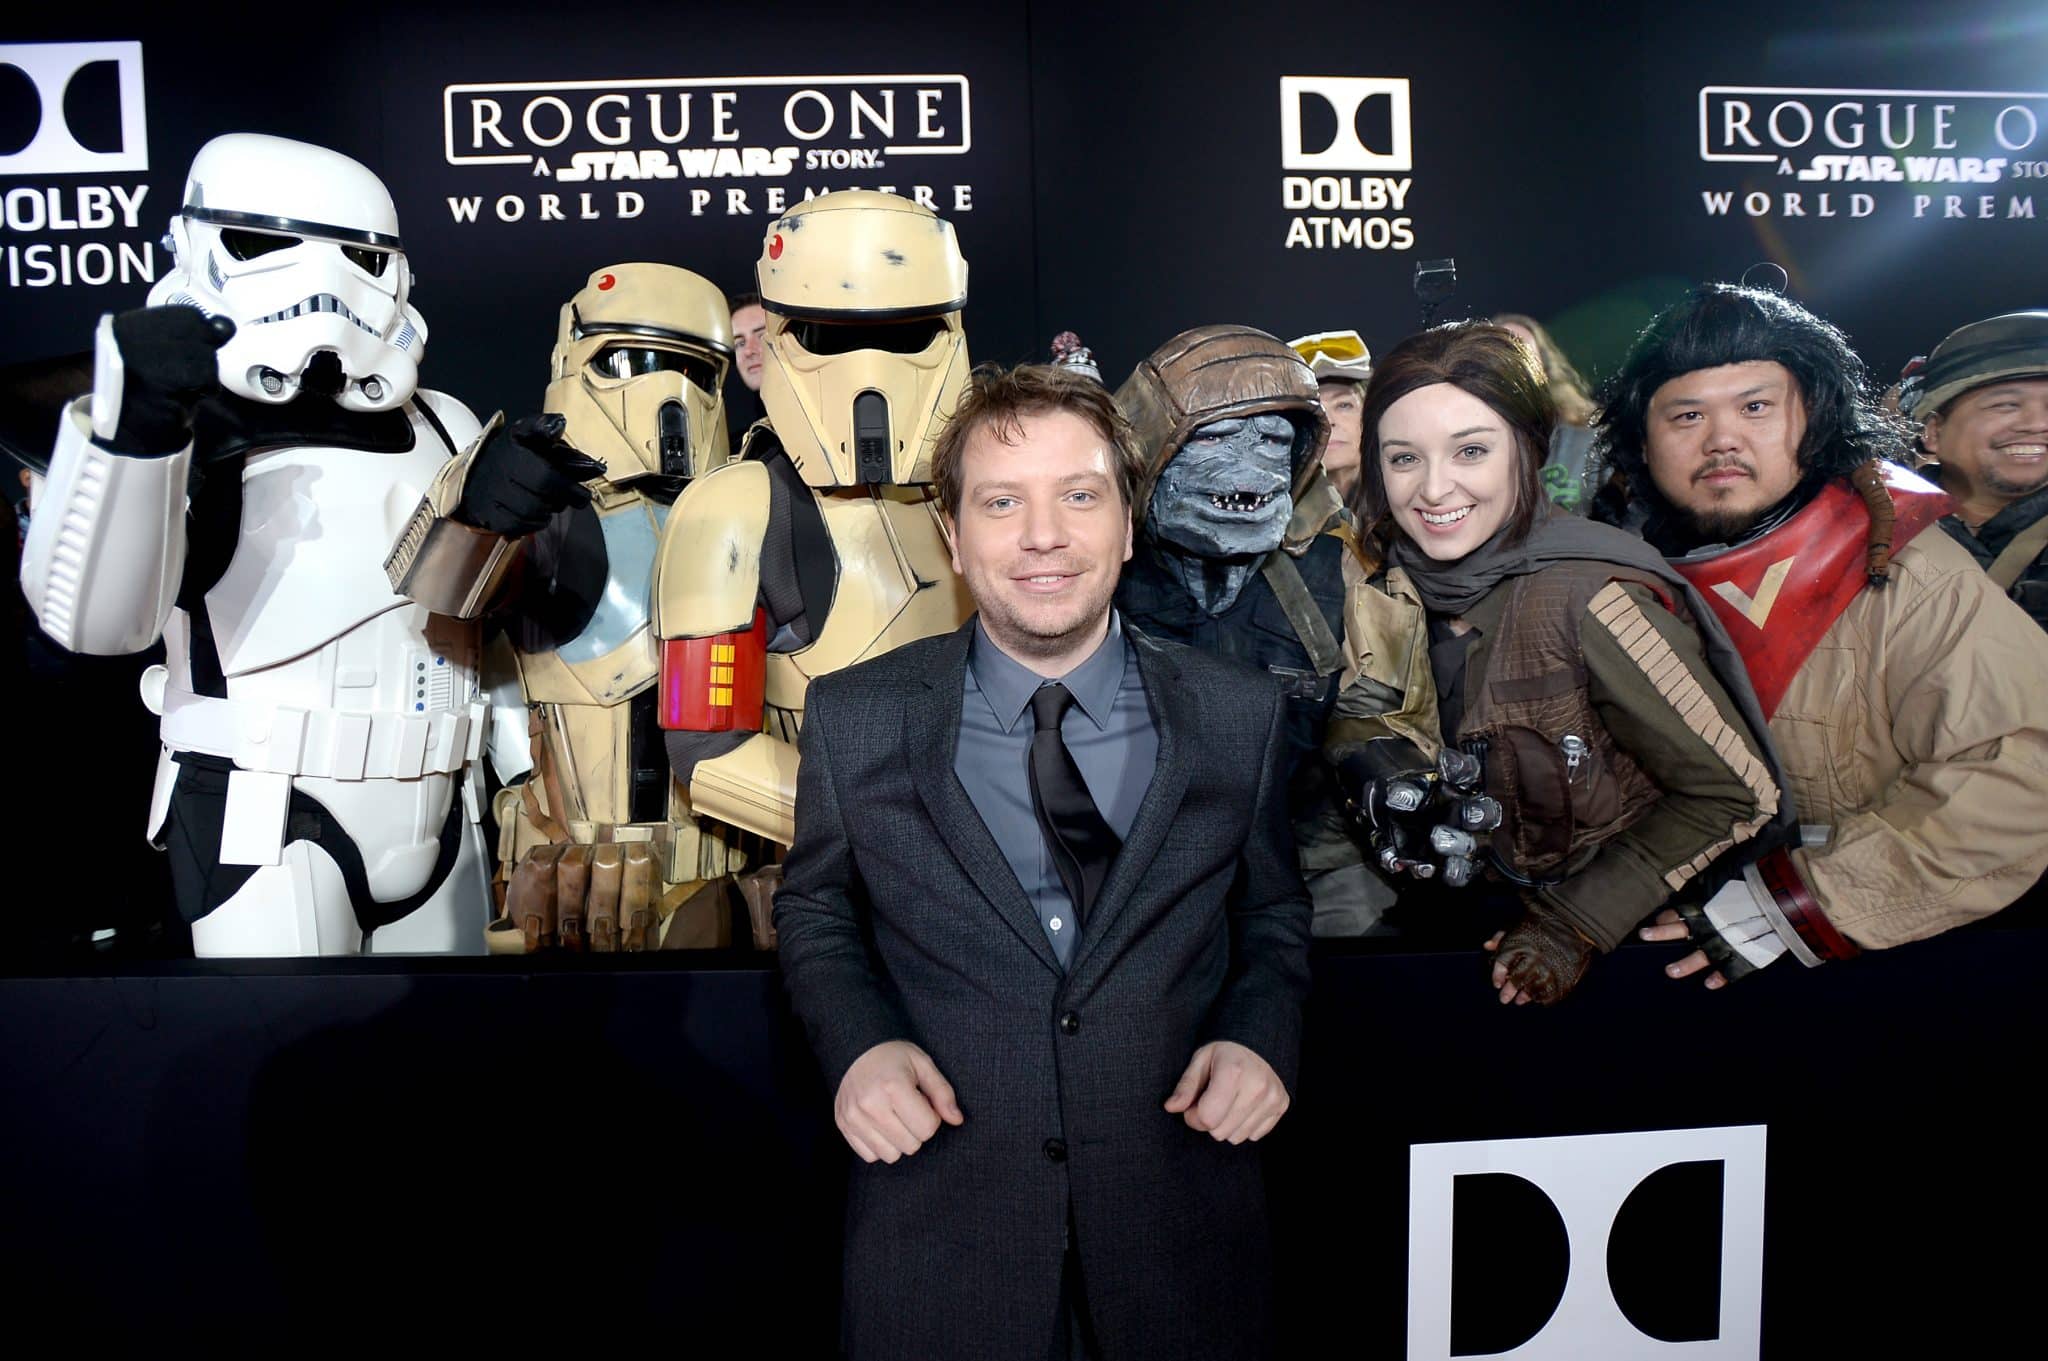 HOLLYWOOD, CA - DECEMBER 10:  Actor Gareth Edwards (C) poses with costumed fans at The World Premiere of Lucasfilm's highly anticipated, first-ever, standalone Star Wars adventure, "Rogue One: A Star Wars Story" at the Pantages Theatre on December 10, 2016 in Hollywood, California.  (Photo by Charley Gallay/Getty Images for Disney) *** Local Caption *** Gareth Edwards